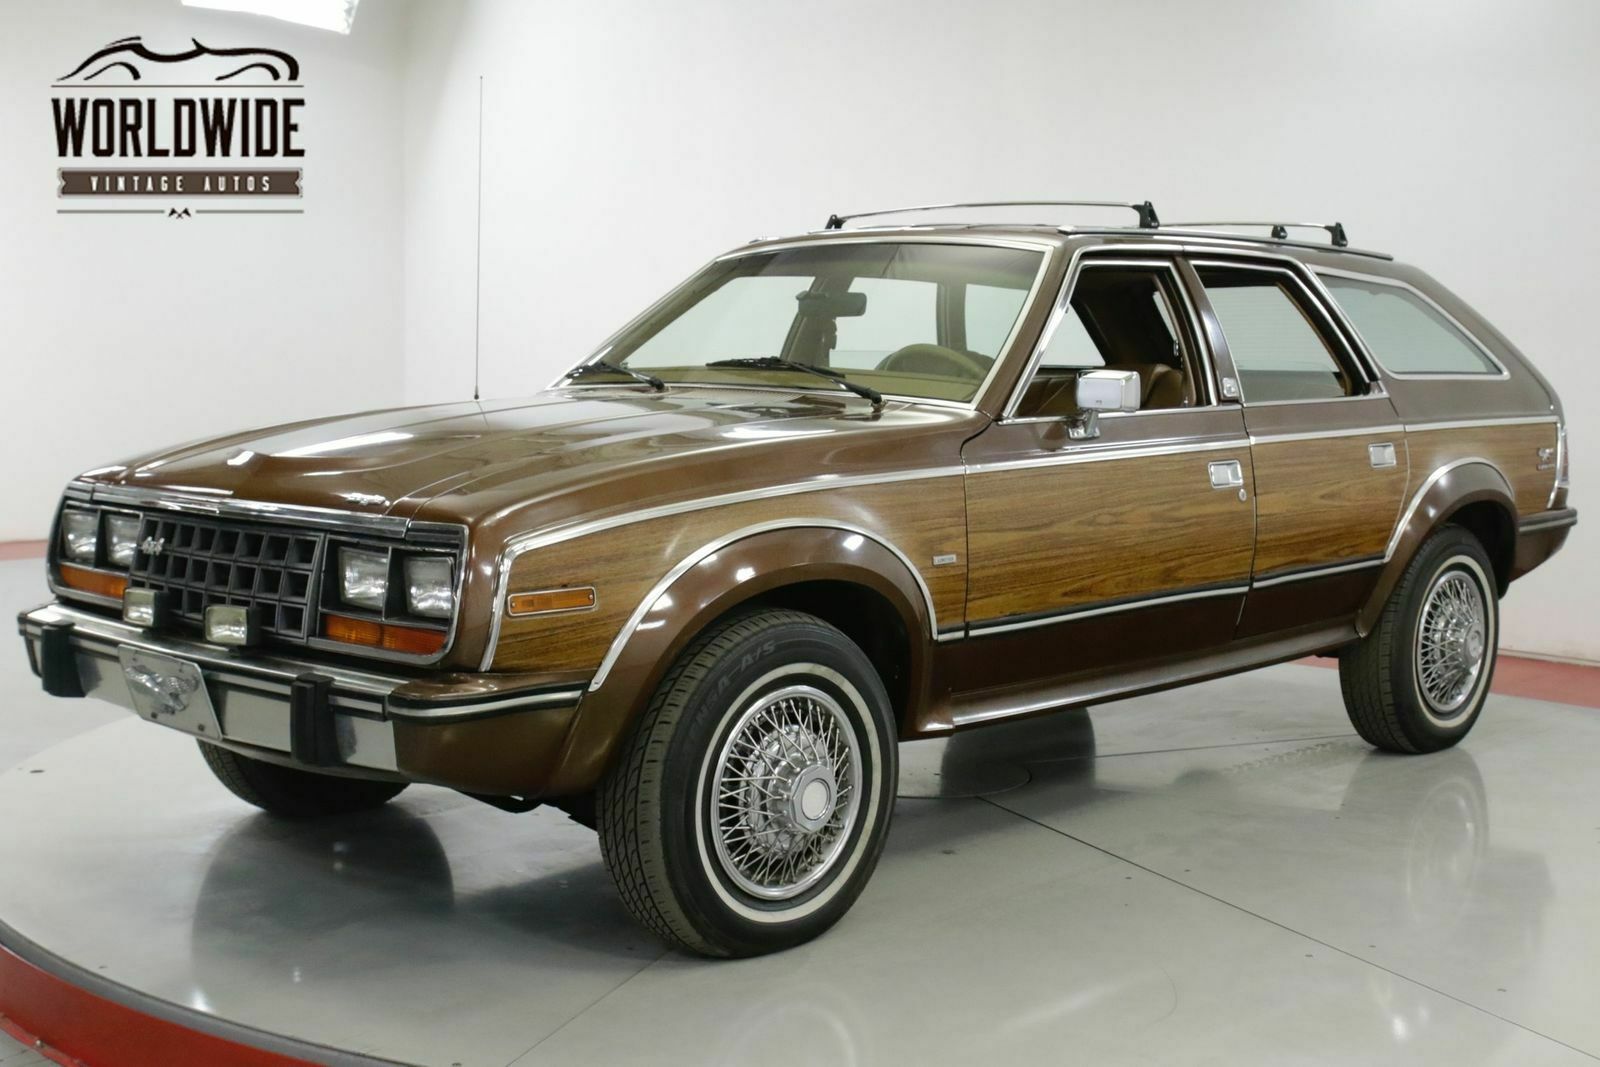 This AMC Eagle Is the Crossover Alternative for the Righteous and Just